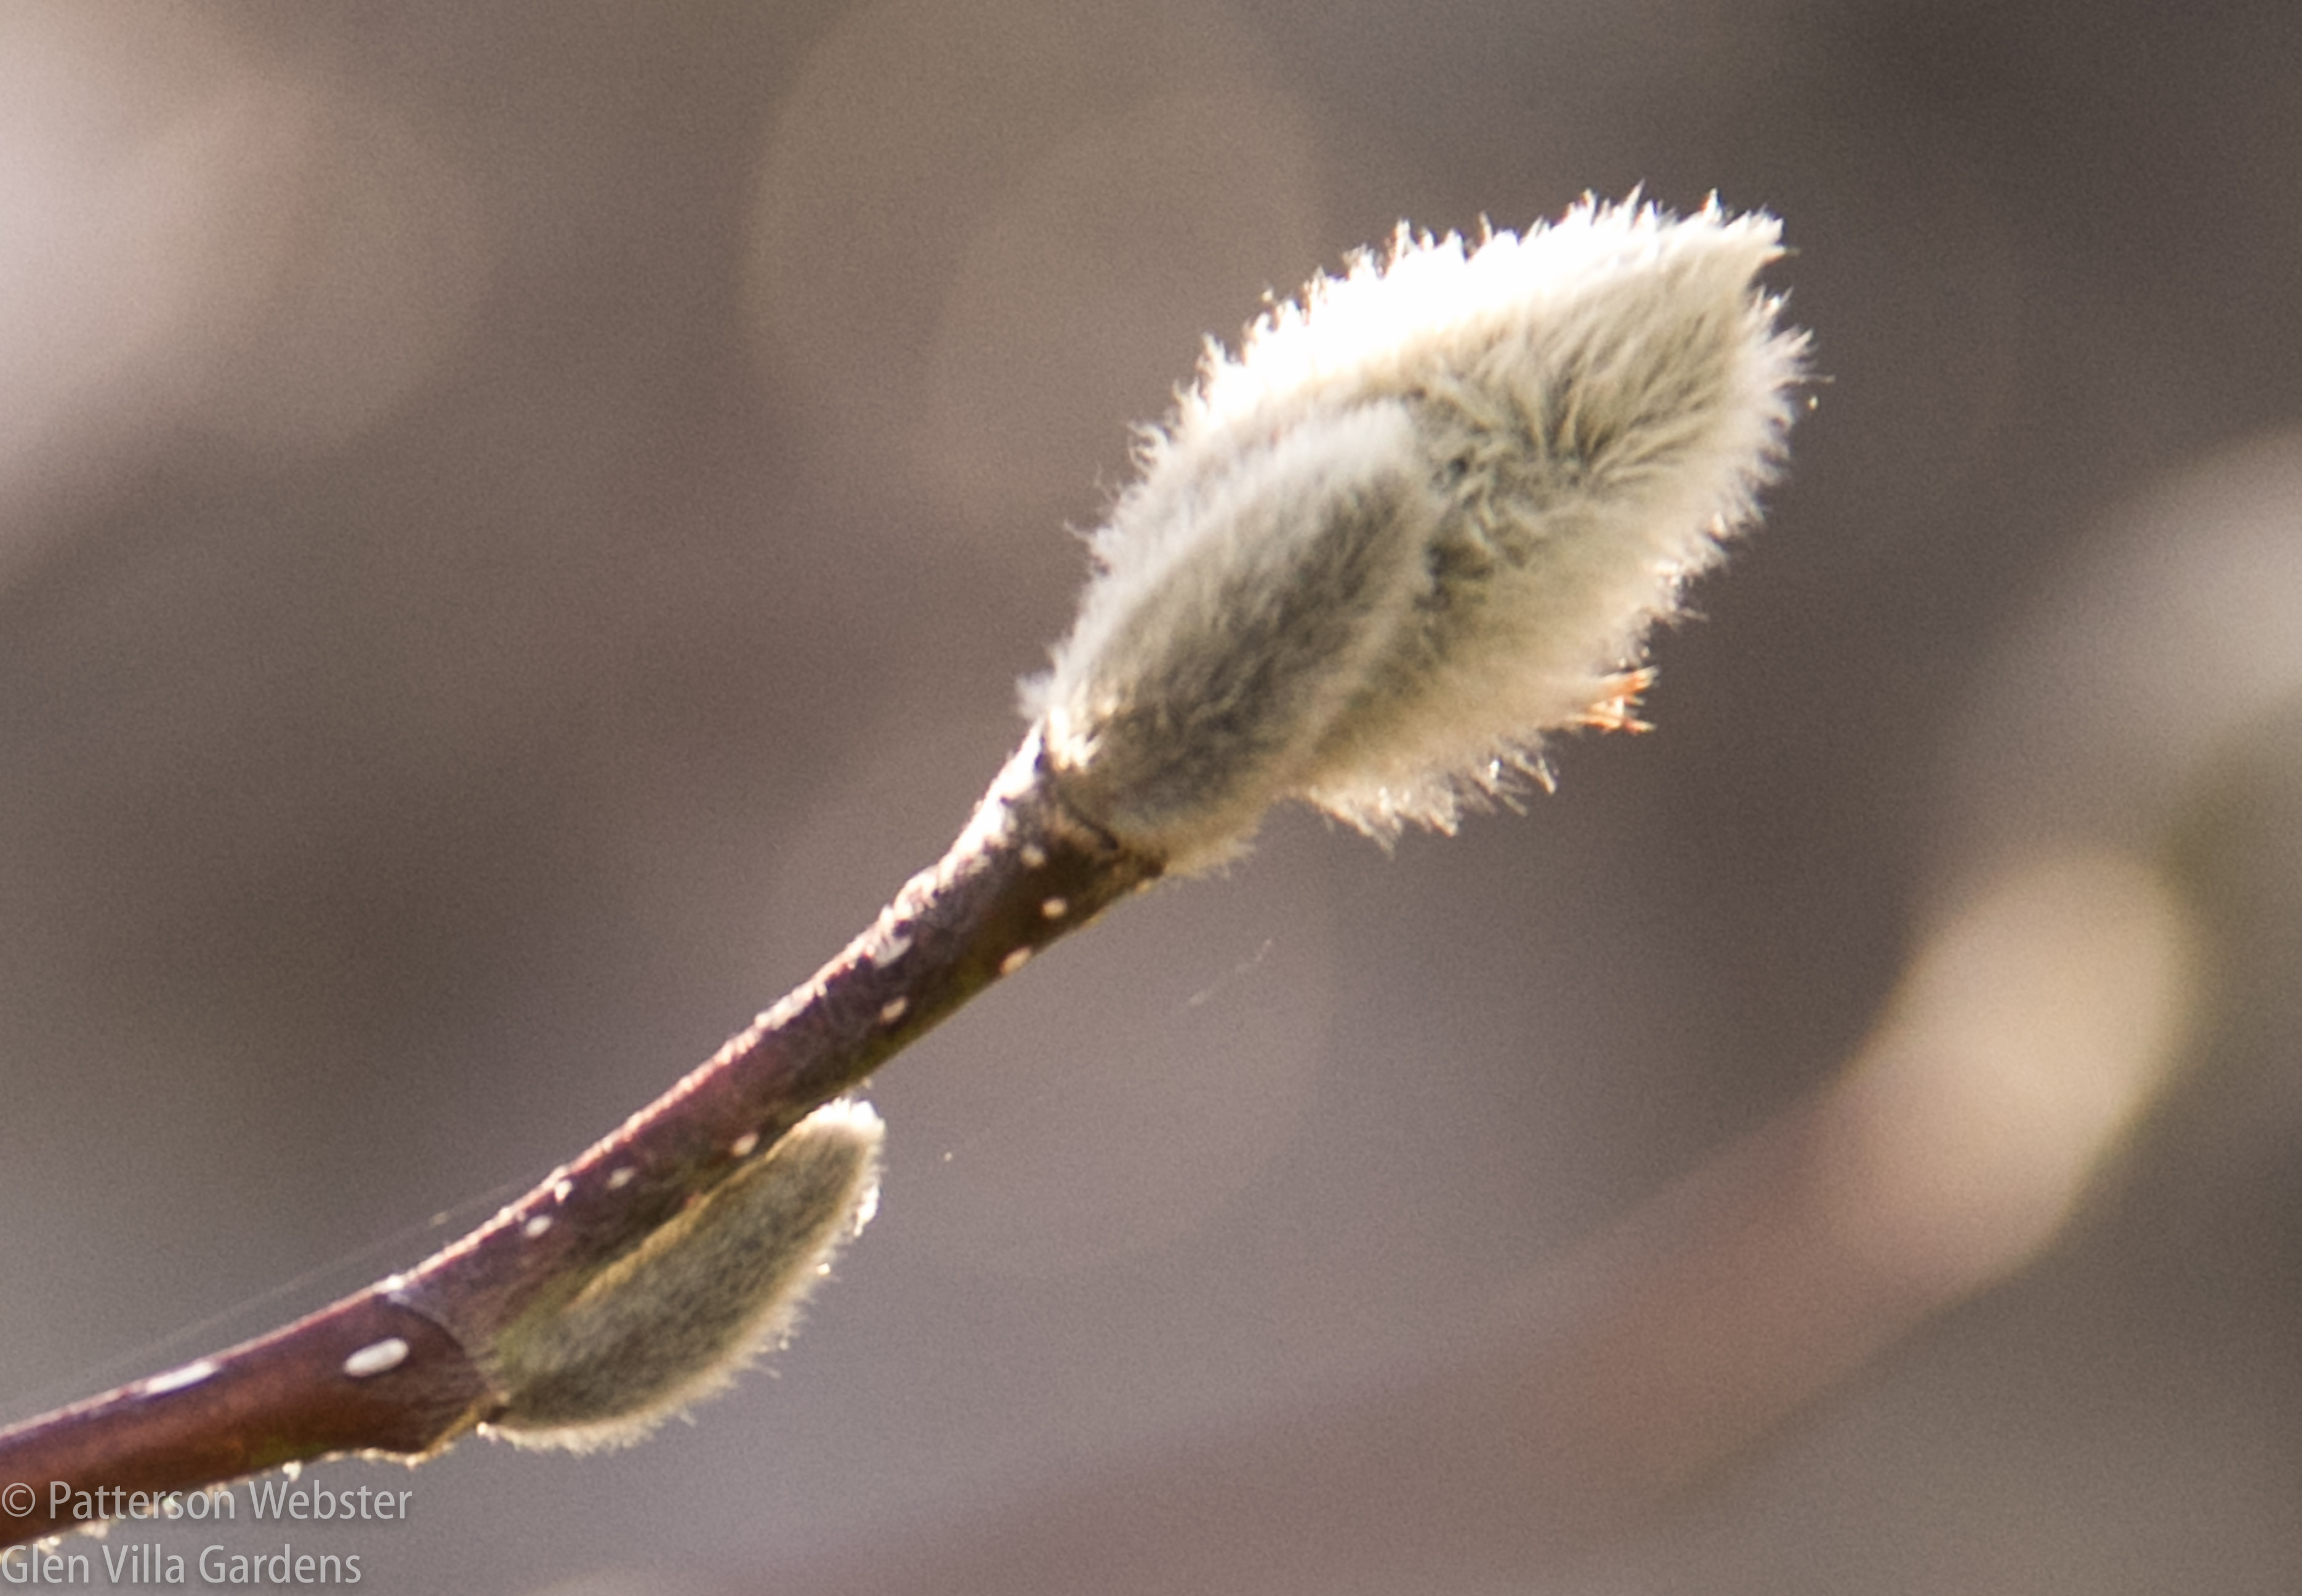 The buds of M. stellata, or star magnolia, begin to form not long after the blossom fades.